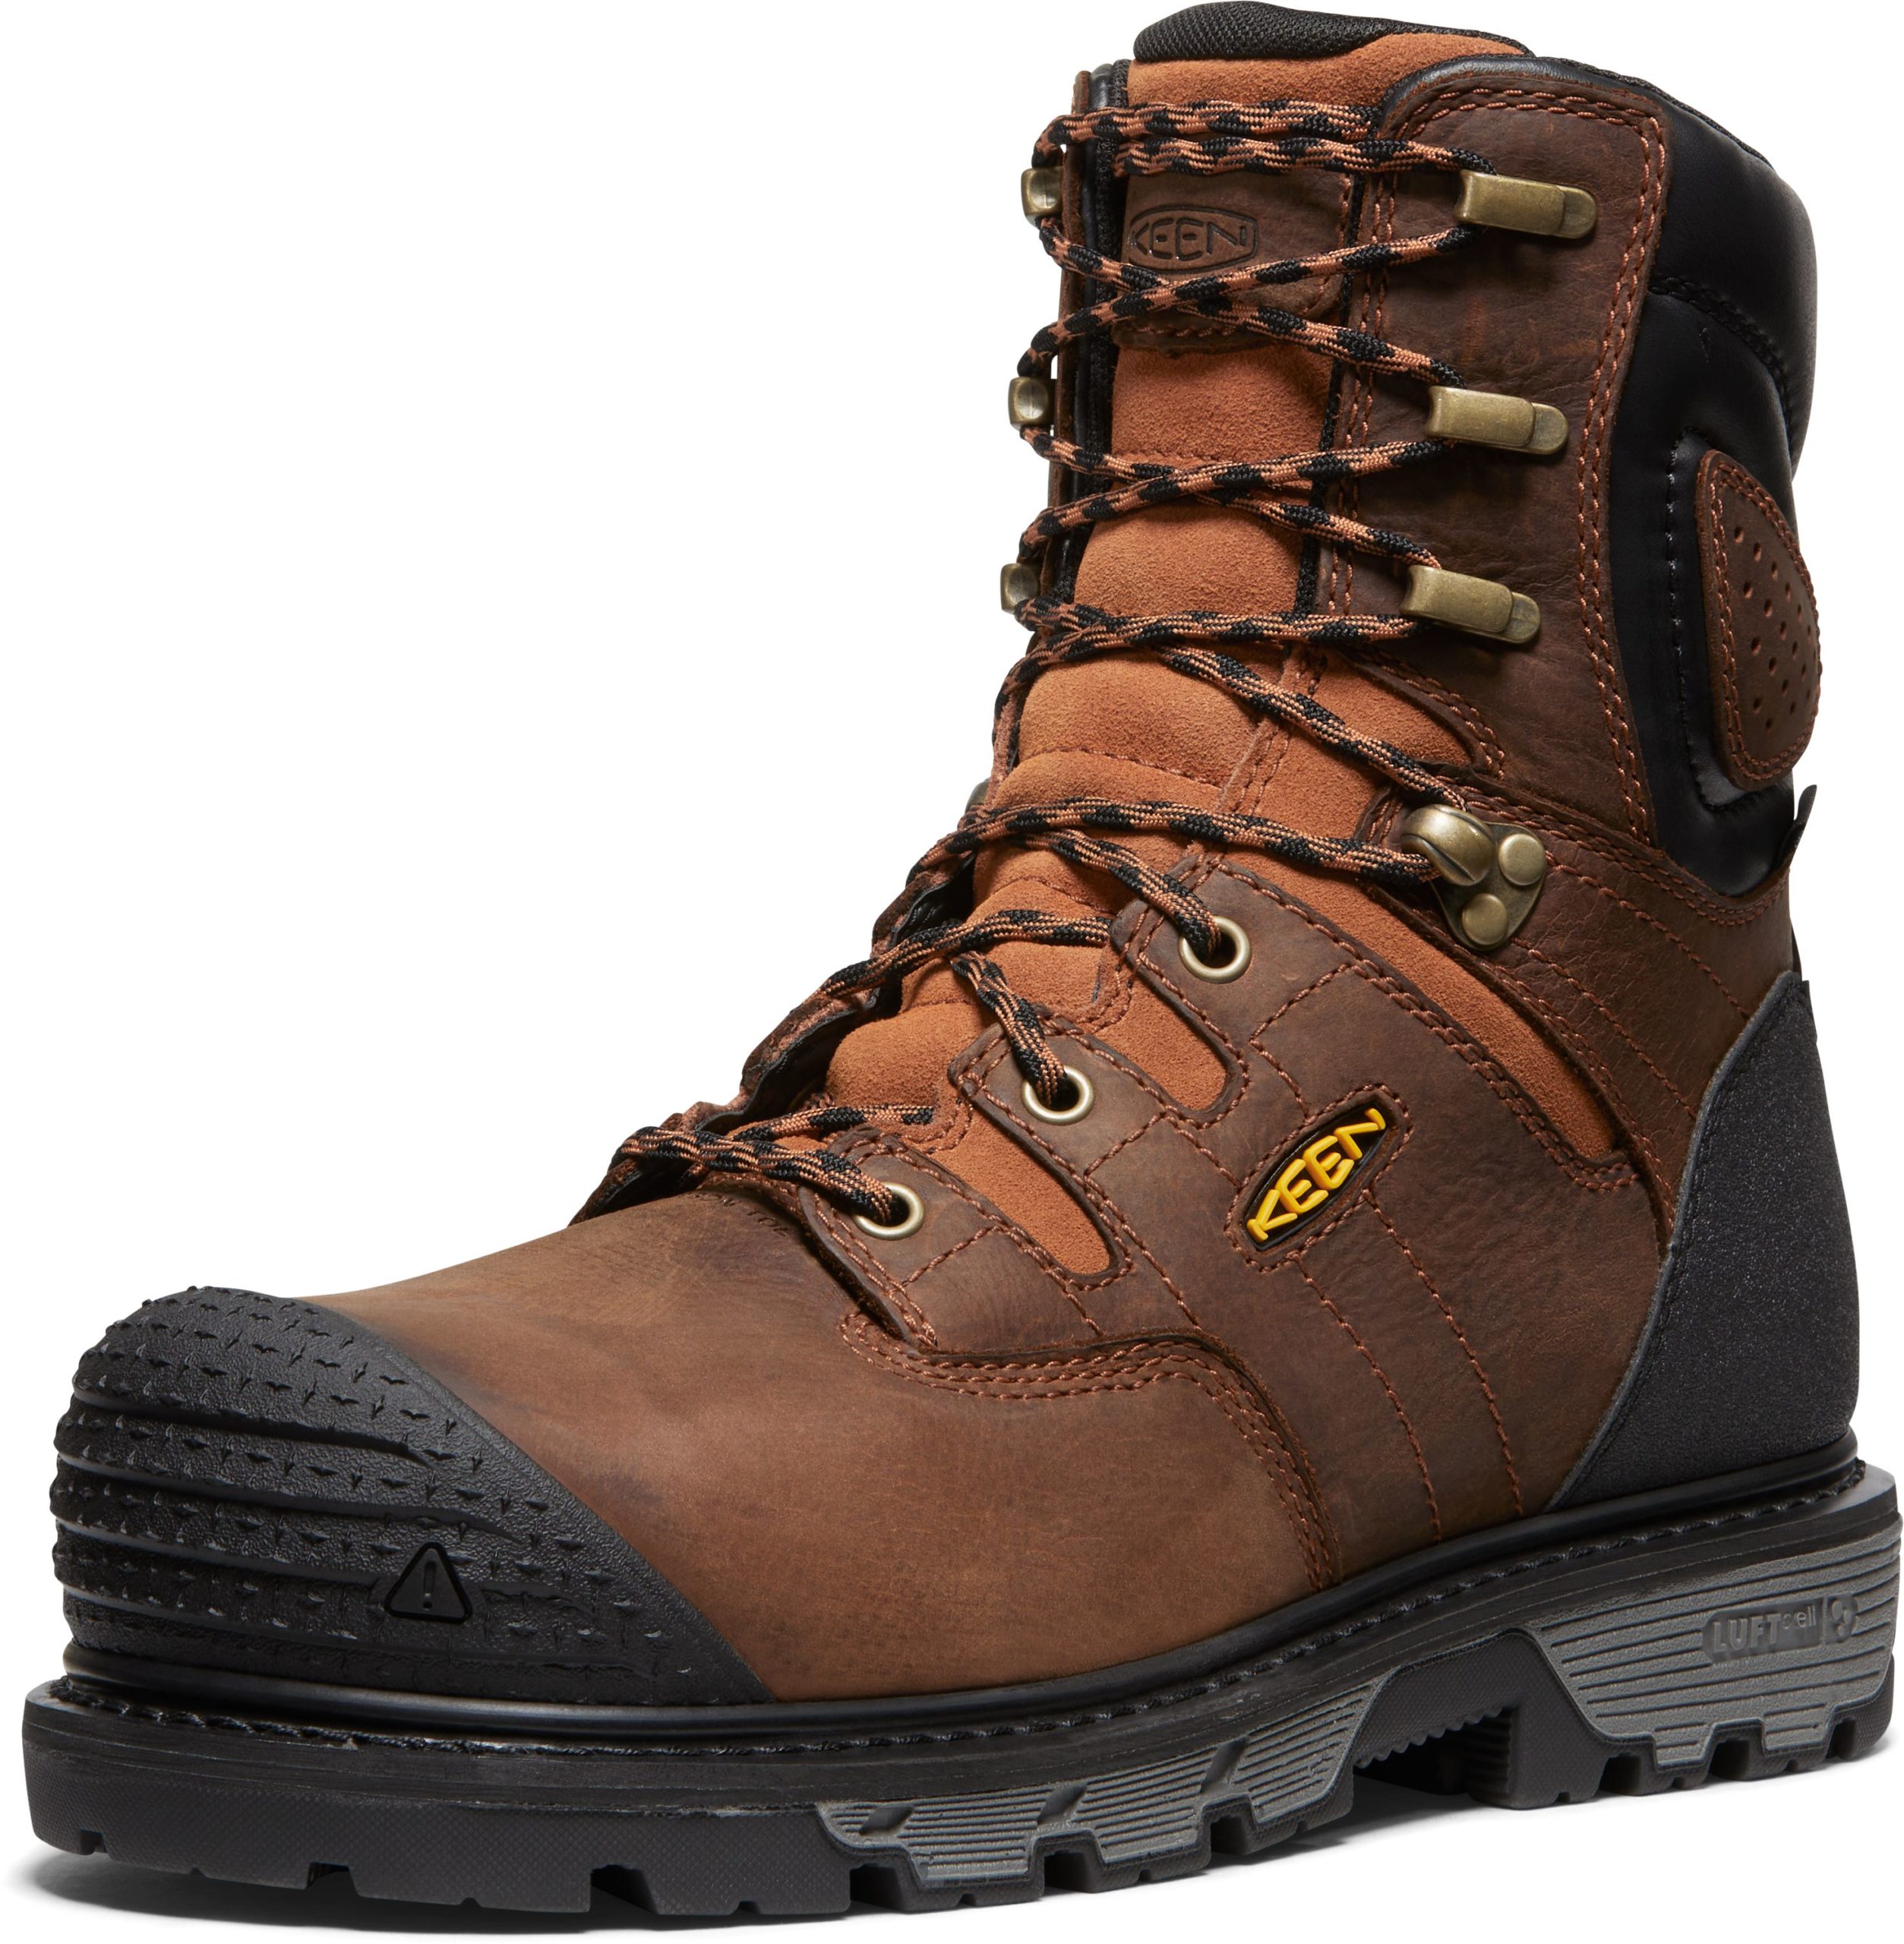 Insulated Work Boots - Roofing